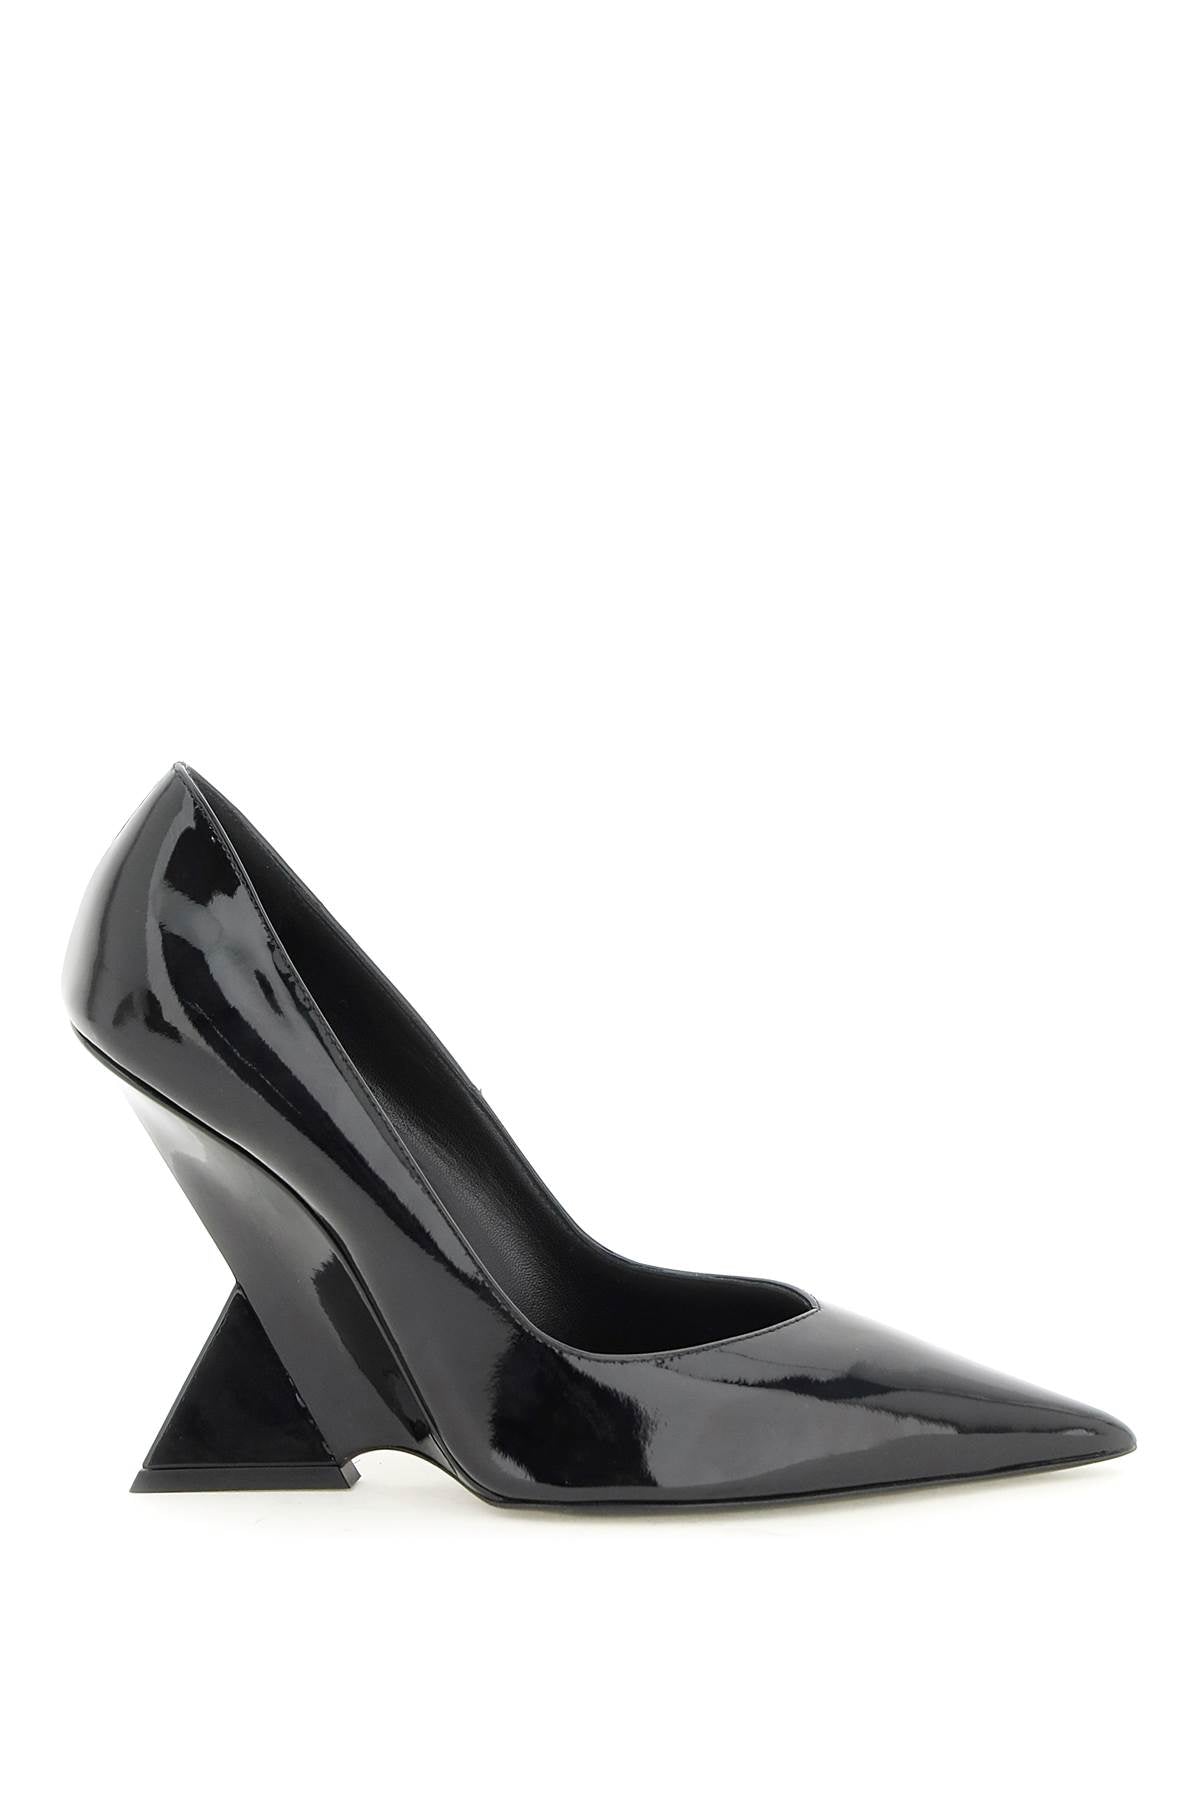 THE ATTICO Black Patent Leather Pointed Pumps